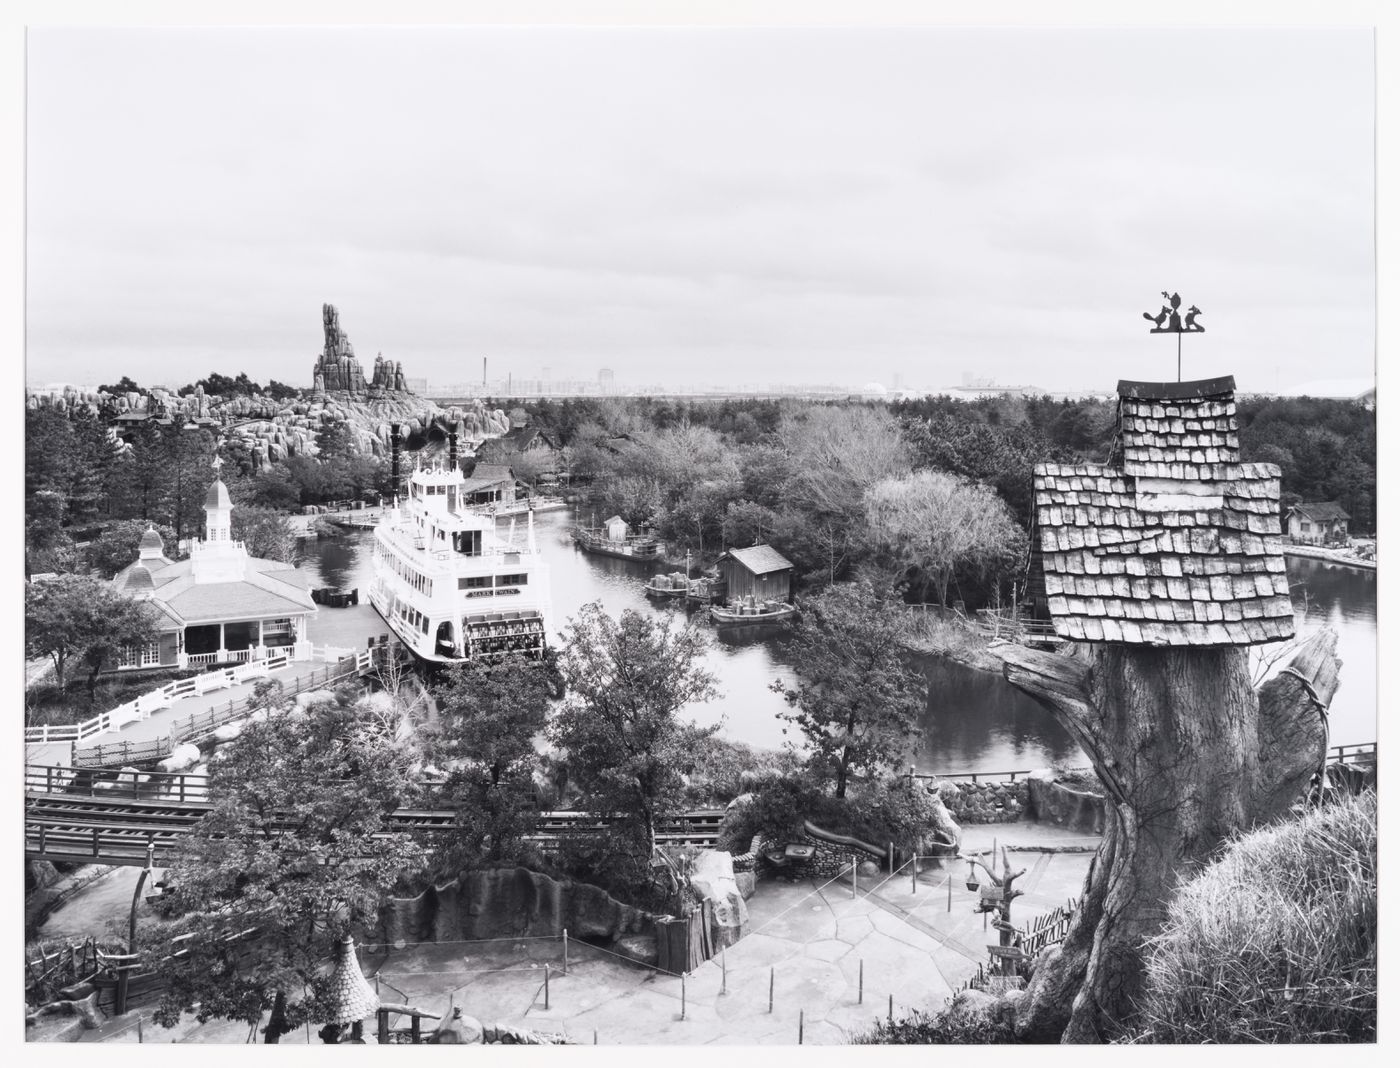 View of Westernland with Mark Twain-style boat, Disneyland, Tokyo, Japan